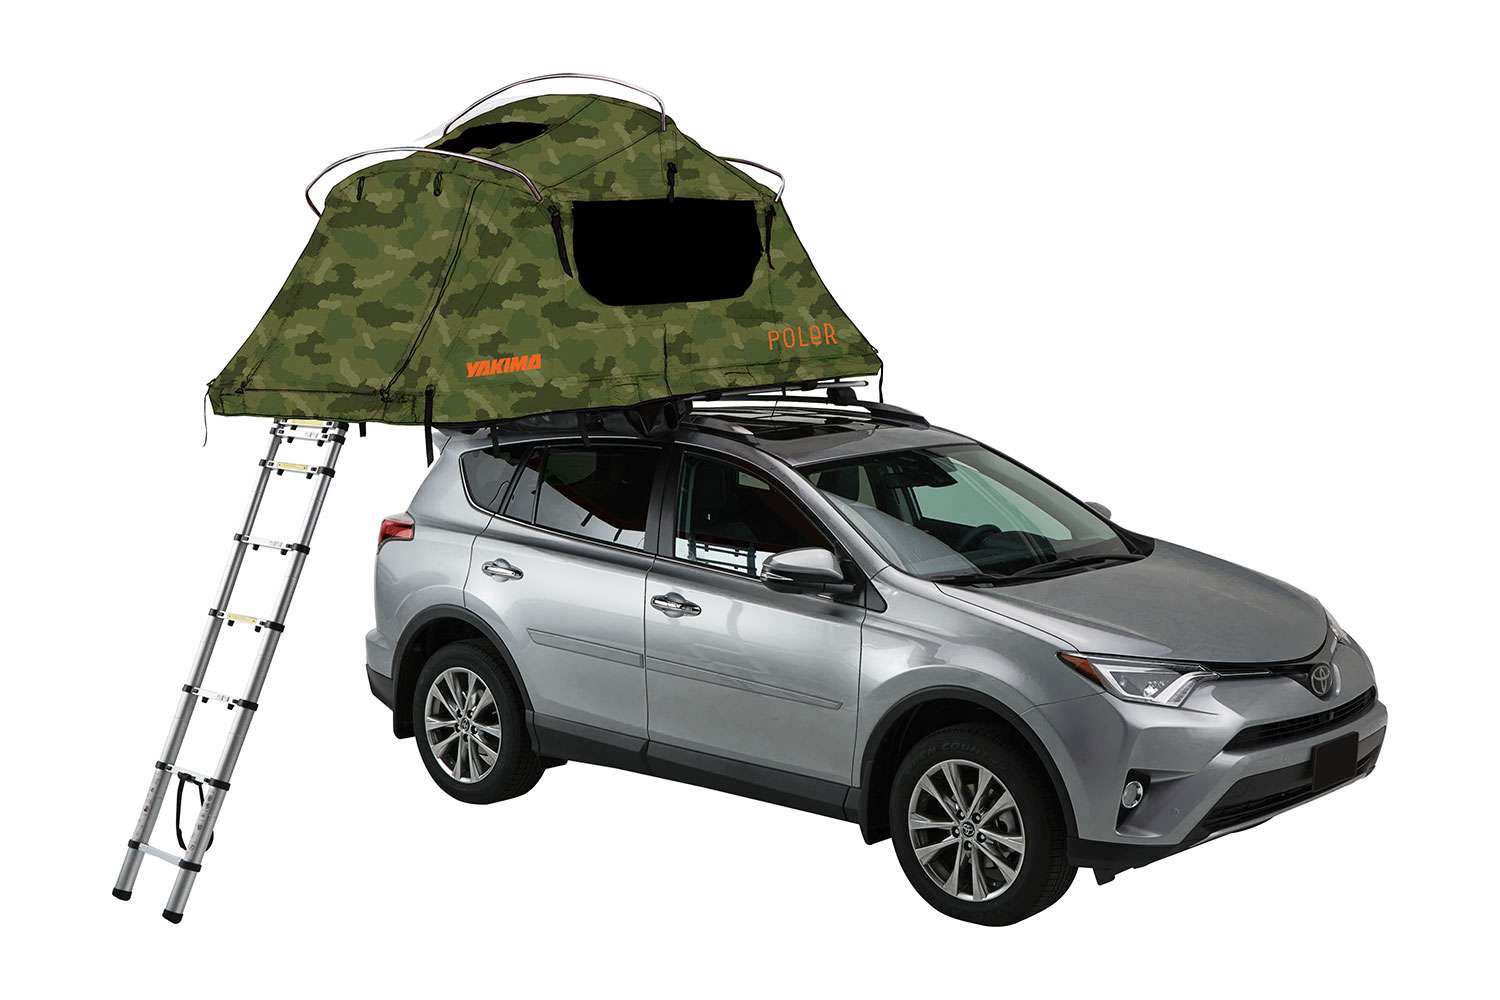 <p><b>Yakima SkyRise, $1,099</b></p> Light and strong, the SkyRise rooftop tent is designed for ease and comfort. Whether itâs an overnight trip or a long fishing weekend, you have the freedom to keep moving your basecamp to find the best spots where the fish are biting. Within minutes, the tent is set-up, and the 210D nylon is light and breathable with mesh panels for ventilation and stargazing. After a full day, rest comfortably on thick, 2 1/2 inch wall-to-wall foam mattress to wake up refreshed and ready to tackle a new day. The weather-shedding rainfly has a waterproof PU coating and for warm, clear evenings, leave it off for a faster set-up and a wide-open view.<br> <a href=